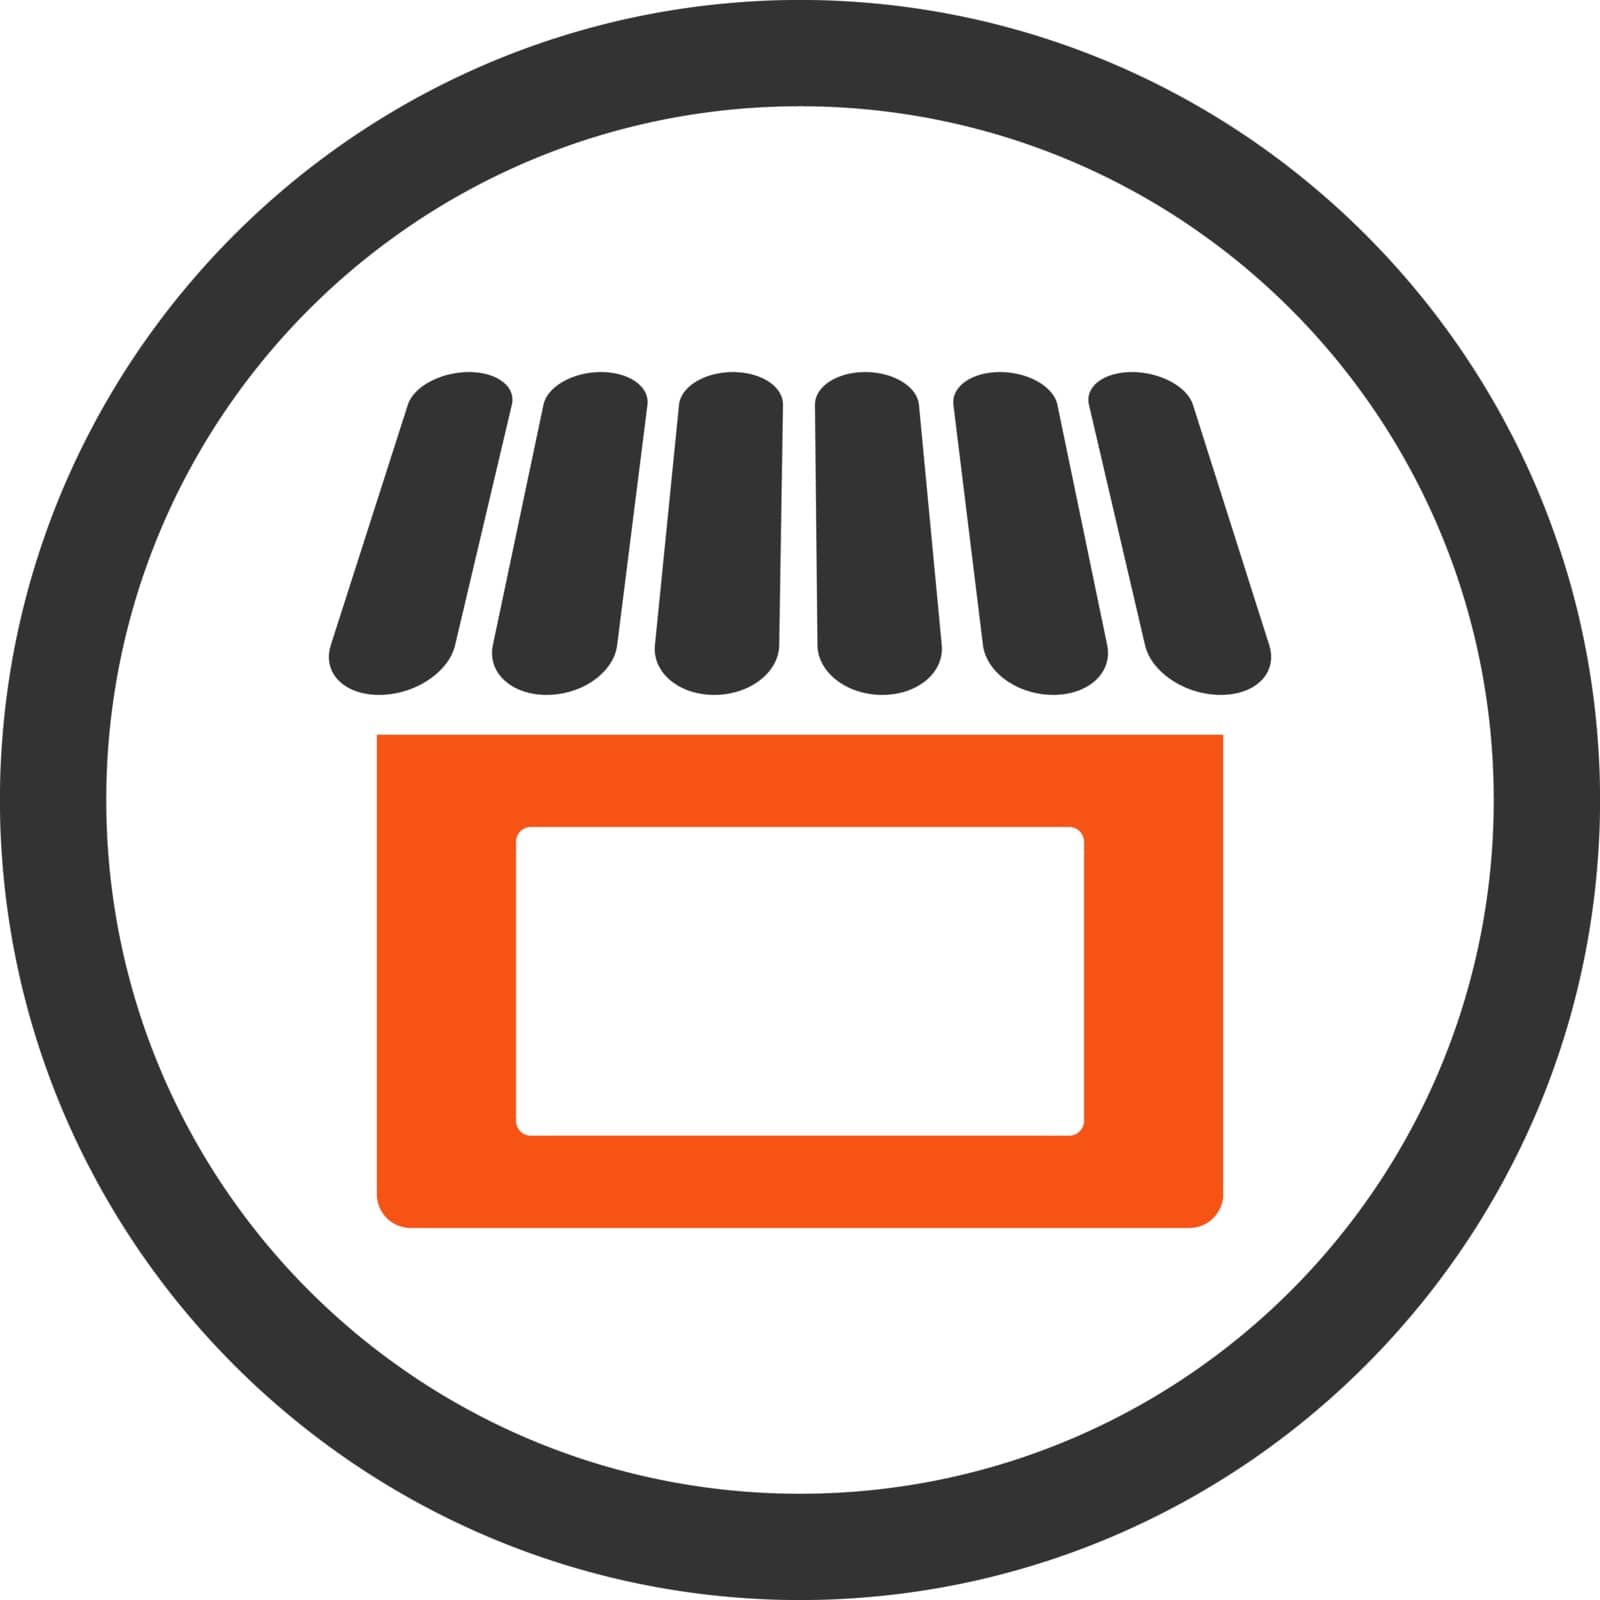 Shop vector icon. This flat rounded symbol uses orange and gray colors and isolated on a white background.